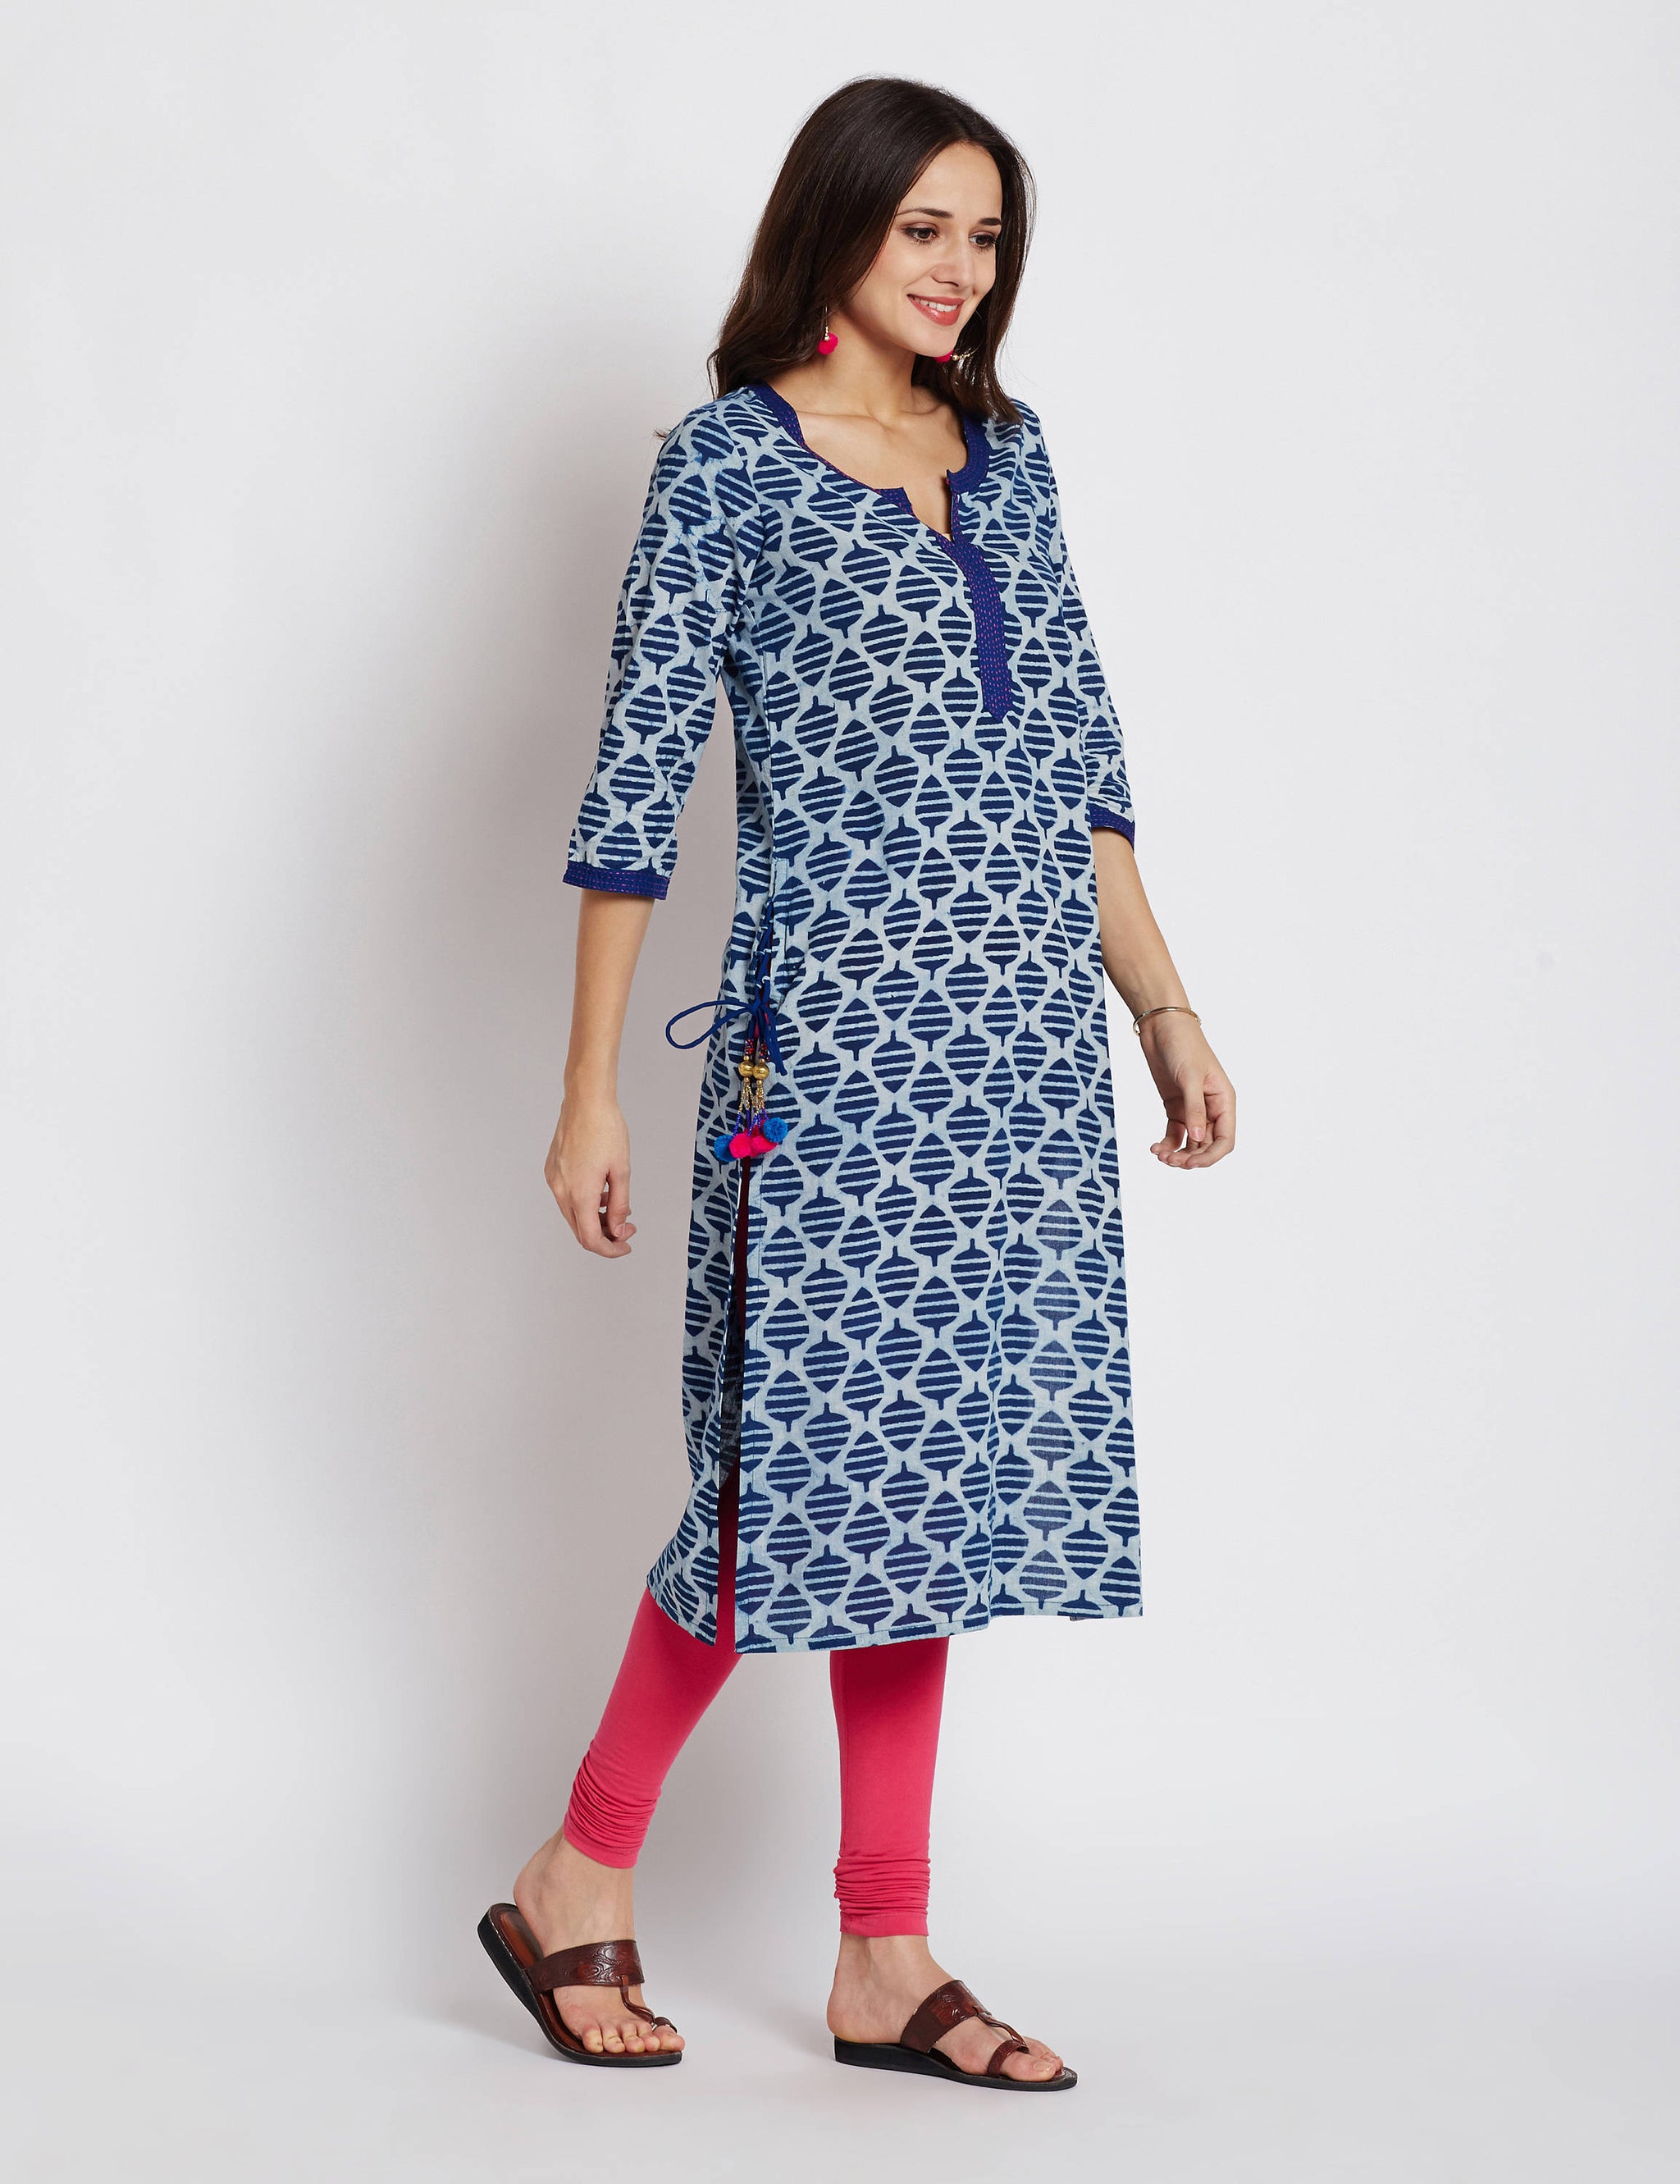 Indigo Hand block printed ethnic long Indian kurta with side tassels and hand embroidery on neck and sleeves